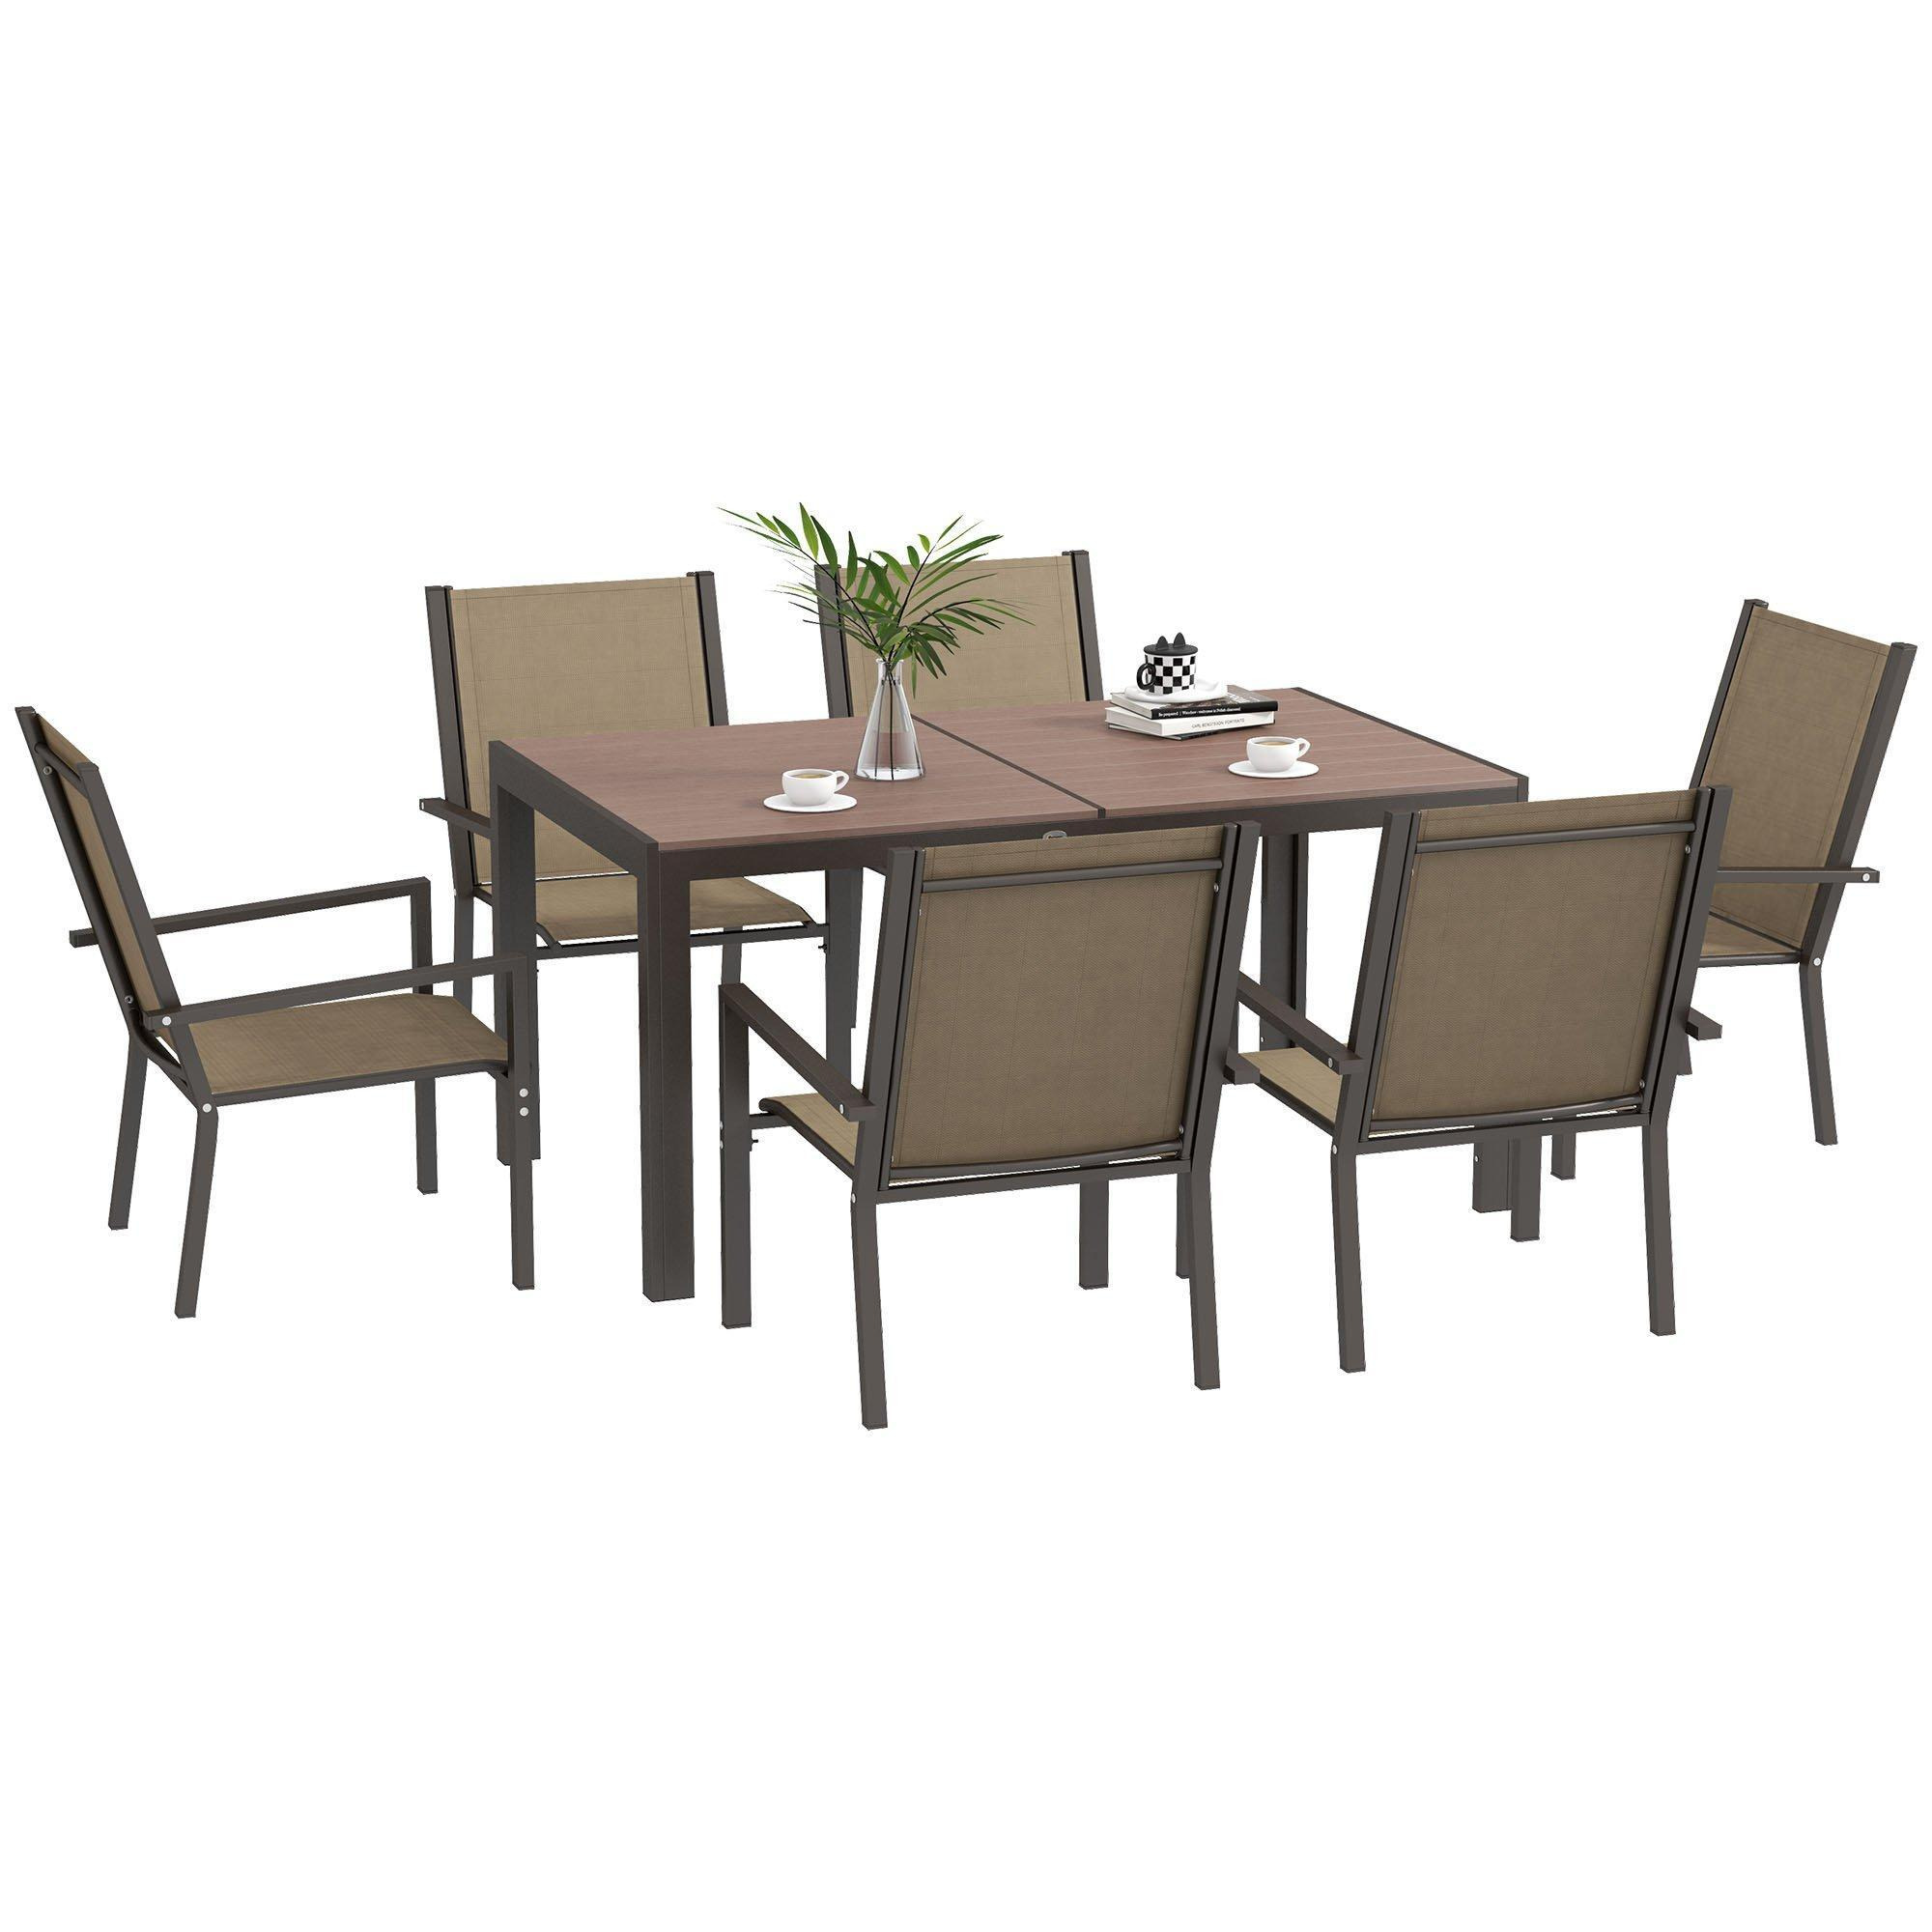 7 PCs Outdoor Dining Table and 6 Stackable Armchairs, Garden Dining Set - image 1